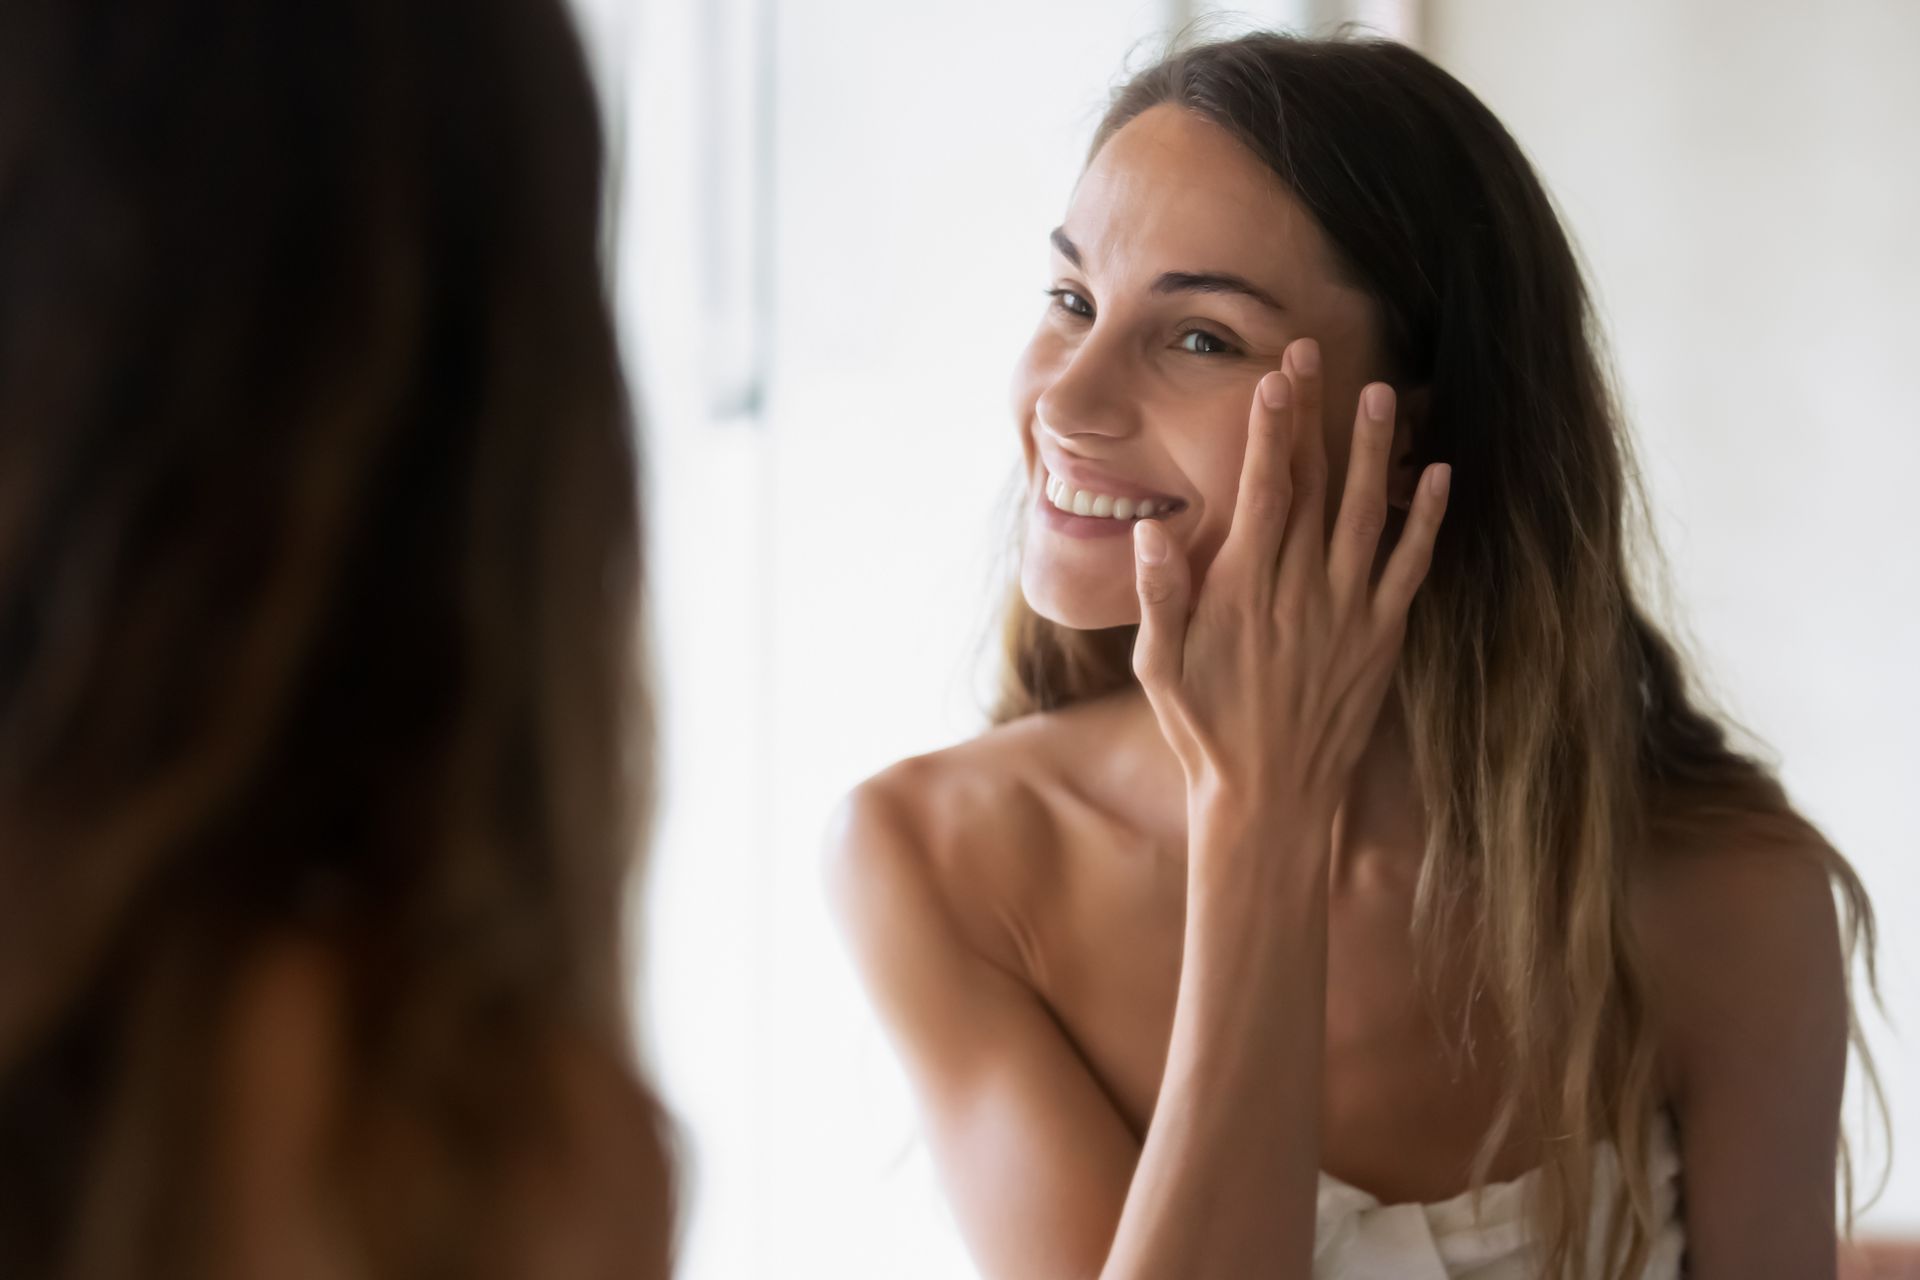 A woman is smiling while looking at her face in the mirror.